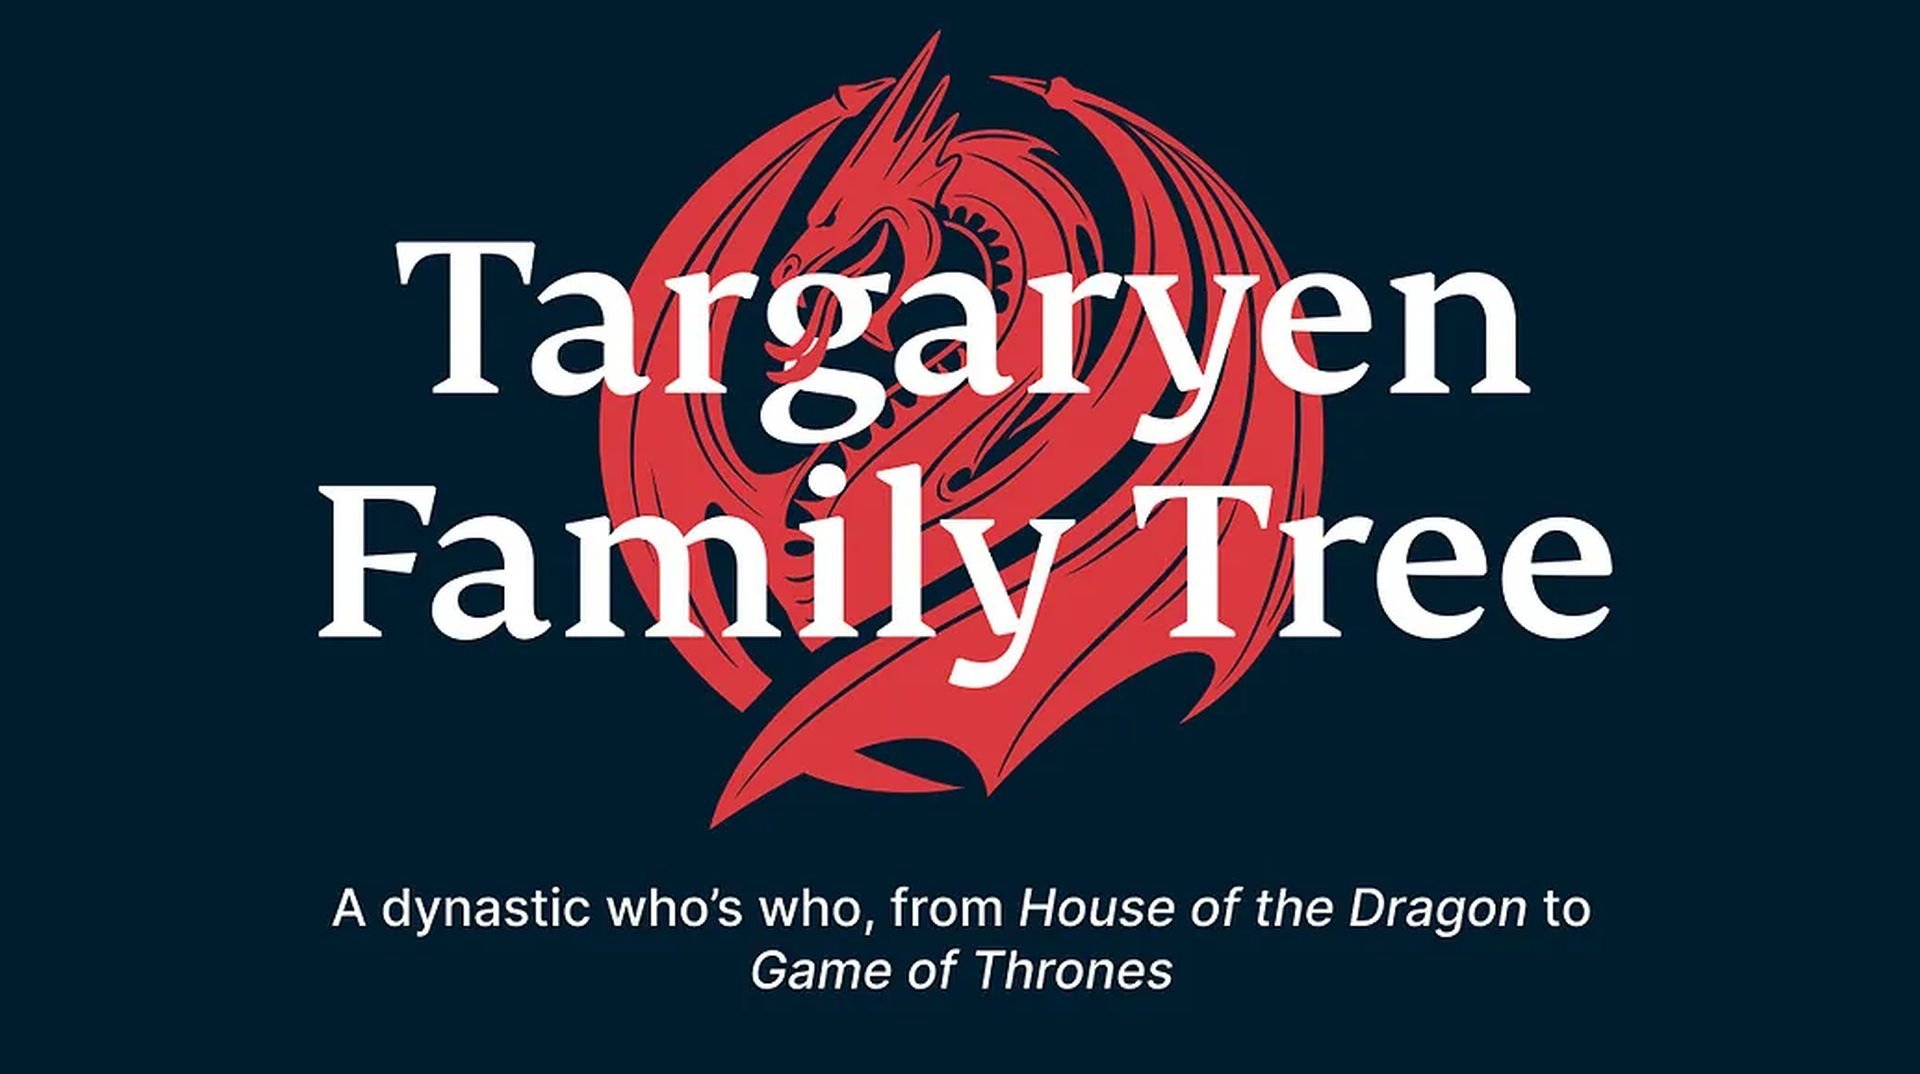 Infographic: Our 'Favorite' Characters in Game of Thrones